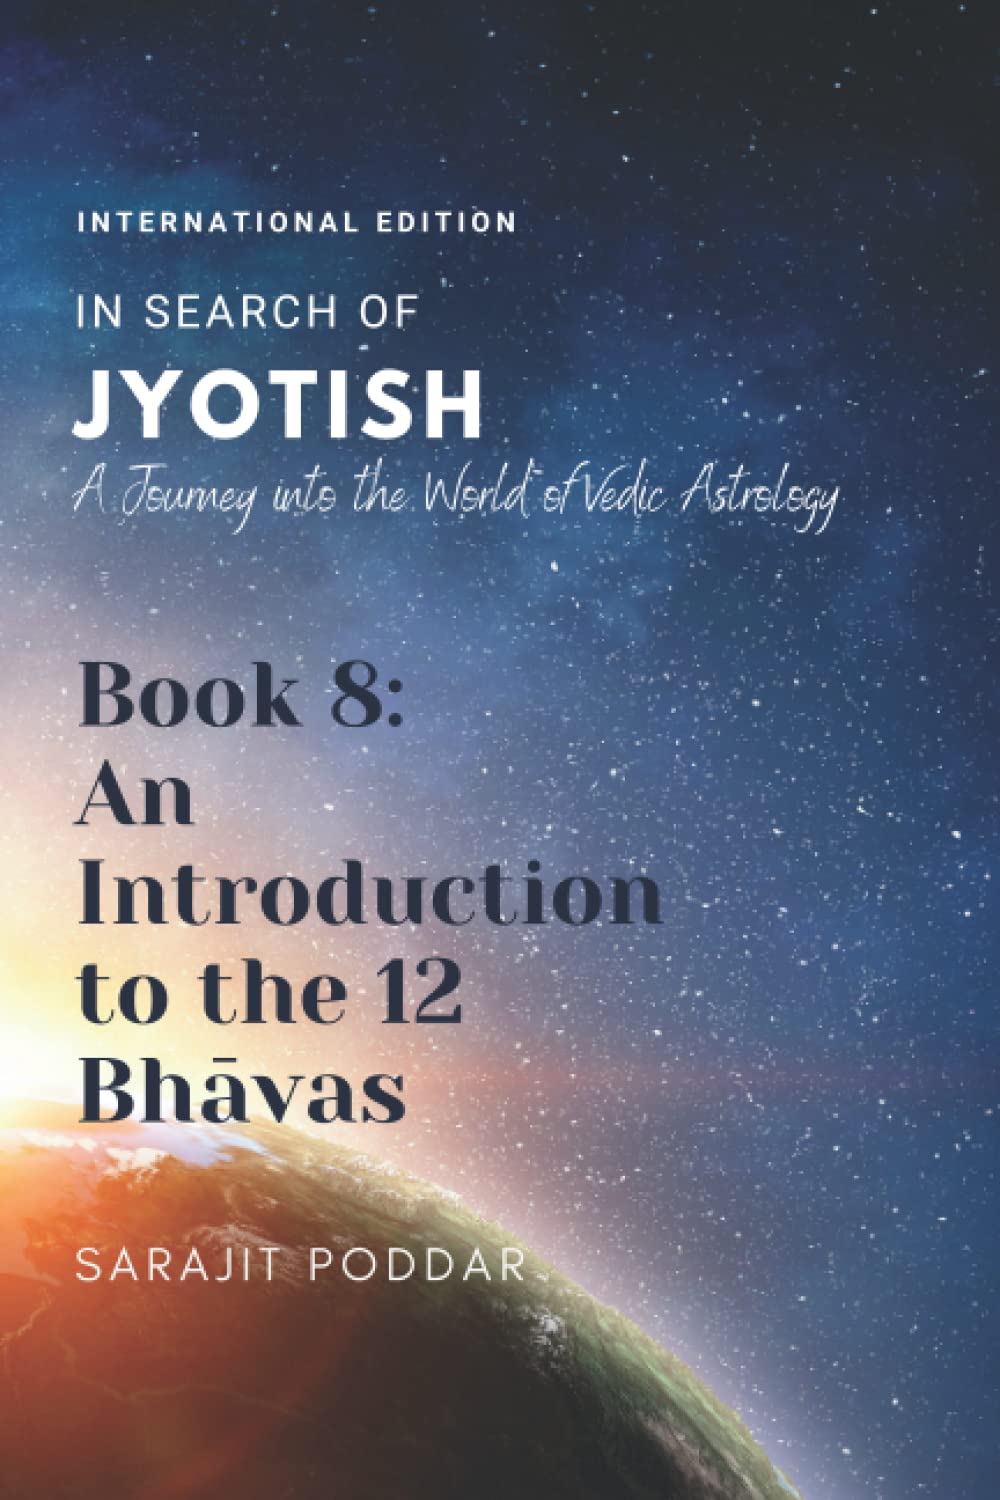 An Introduction to the 12 Bhavas: A Journey into the World of Vedic Astrology